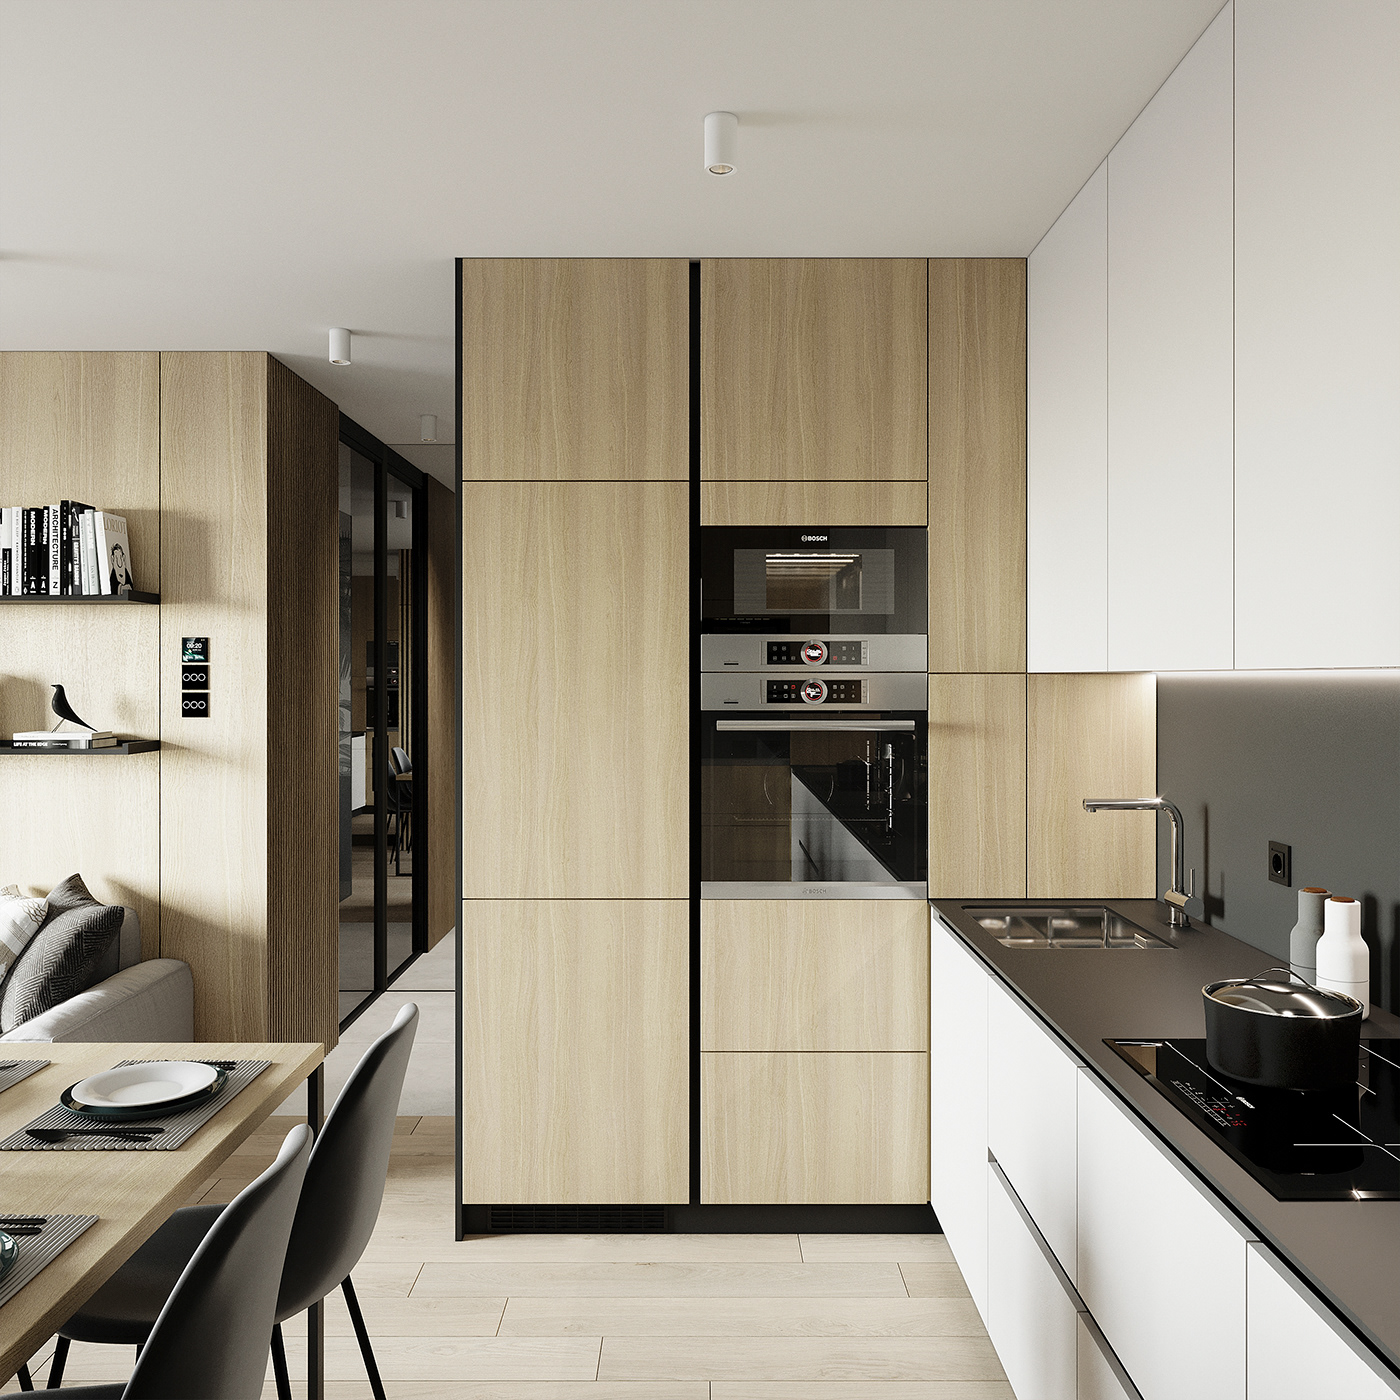 To maximize the apartment's space, a multi-function cabinet that integrates the oven, microwave, and refrigerator is placed in the kitchen.